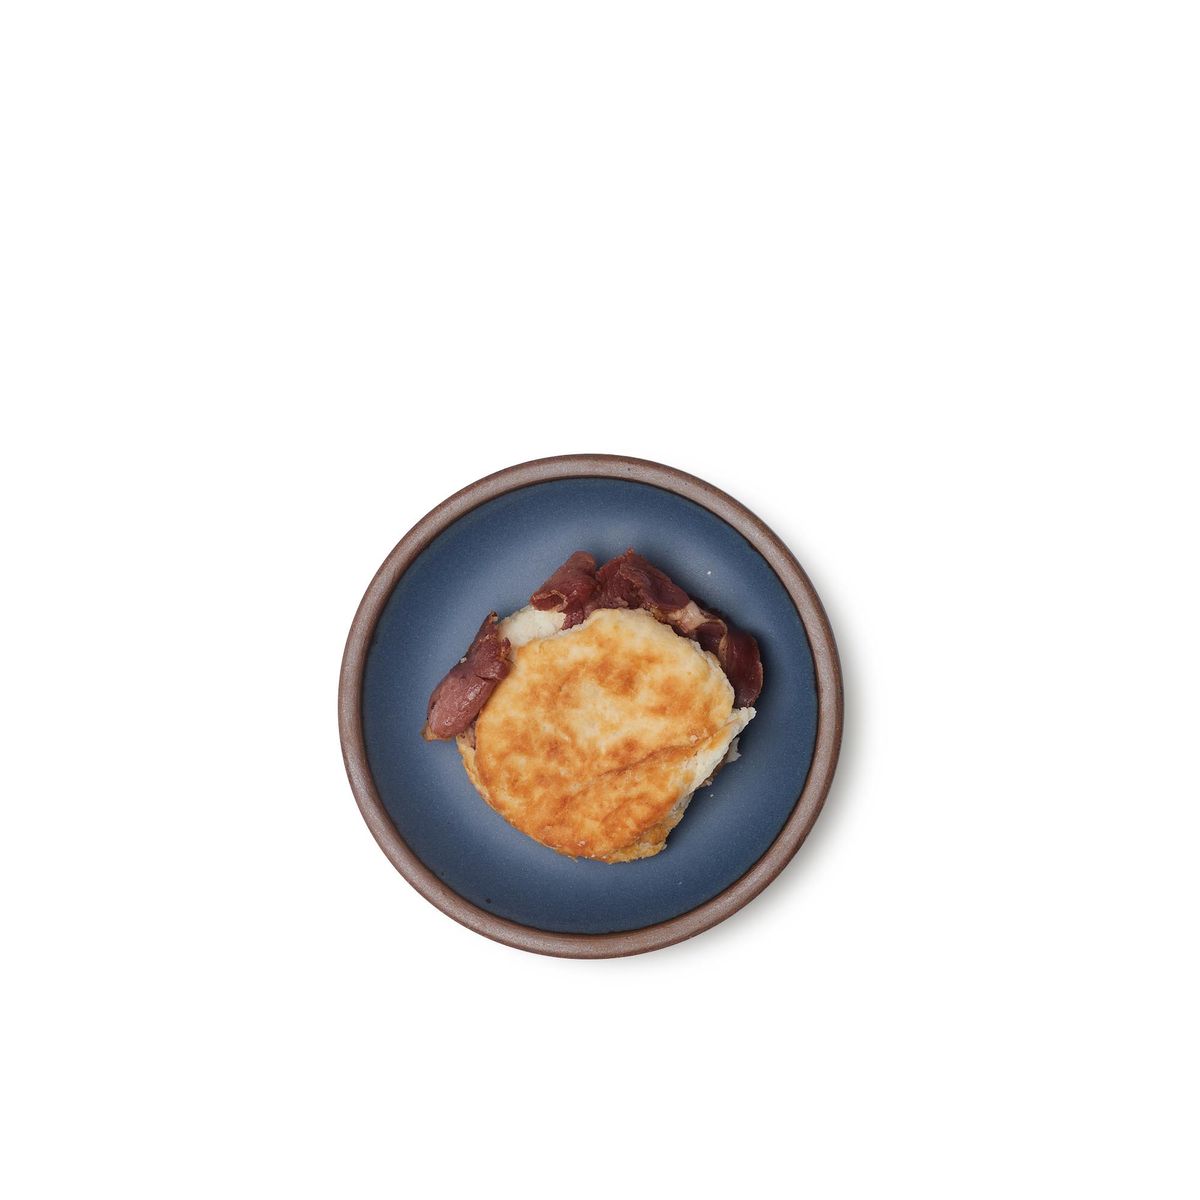 A breakfast sandwich on a dessert sized ceramic plate in a toned-down navy color featuring iron speckles and an unglazed rim.